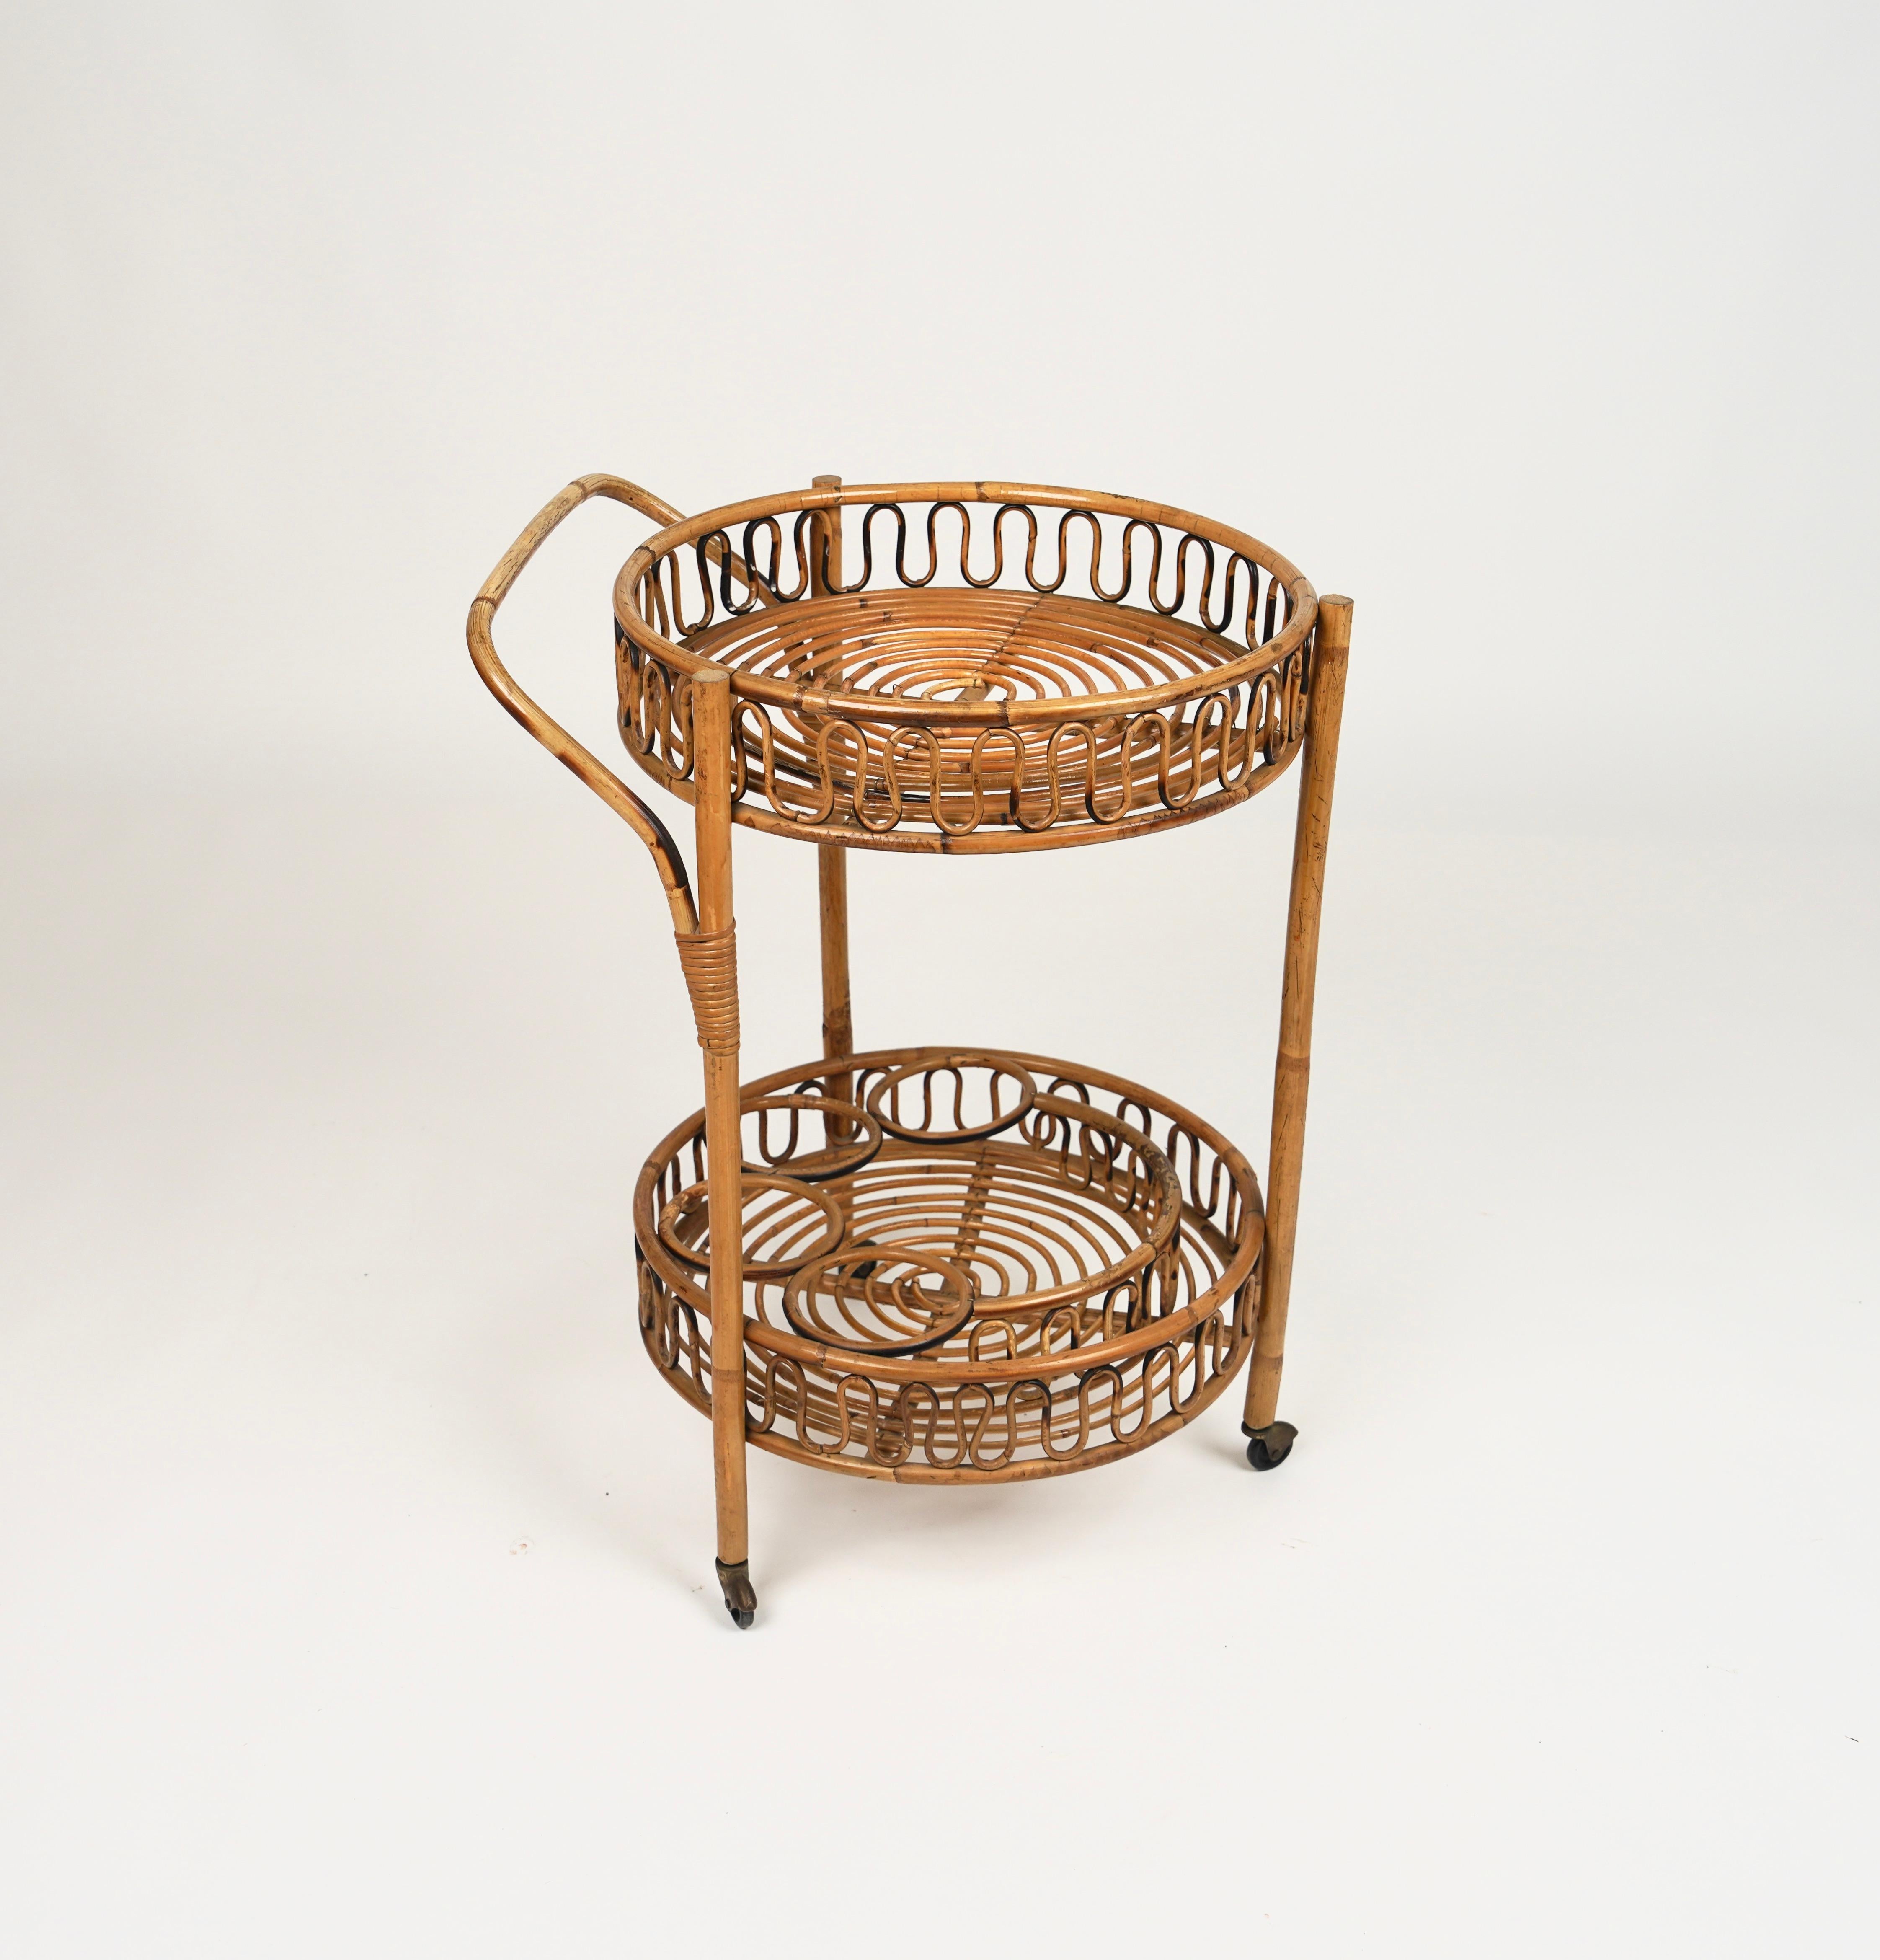 Midcentury round serving bar cart in bamboo and rattan featuring with four bottle holders and a handle on the top level.
Made in Italy in the 1960s.
A fabulous serving table that will be the centrepiece of a midcentury bar or living room.